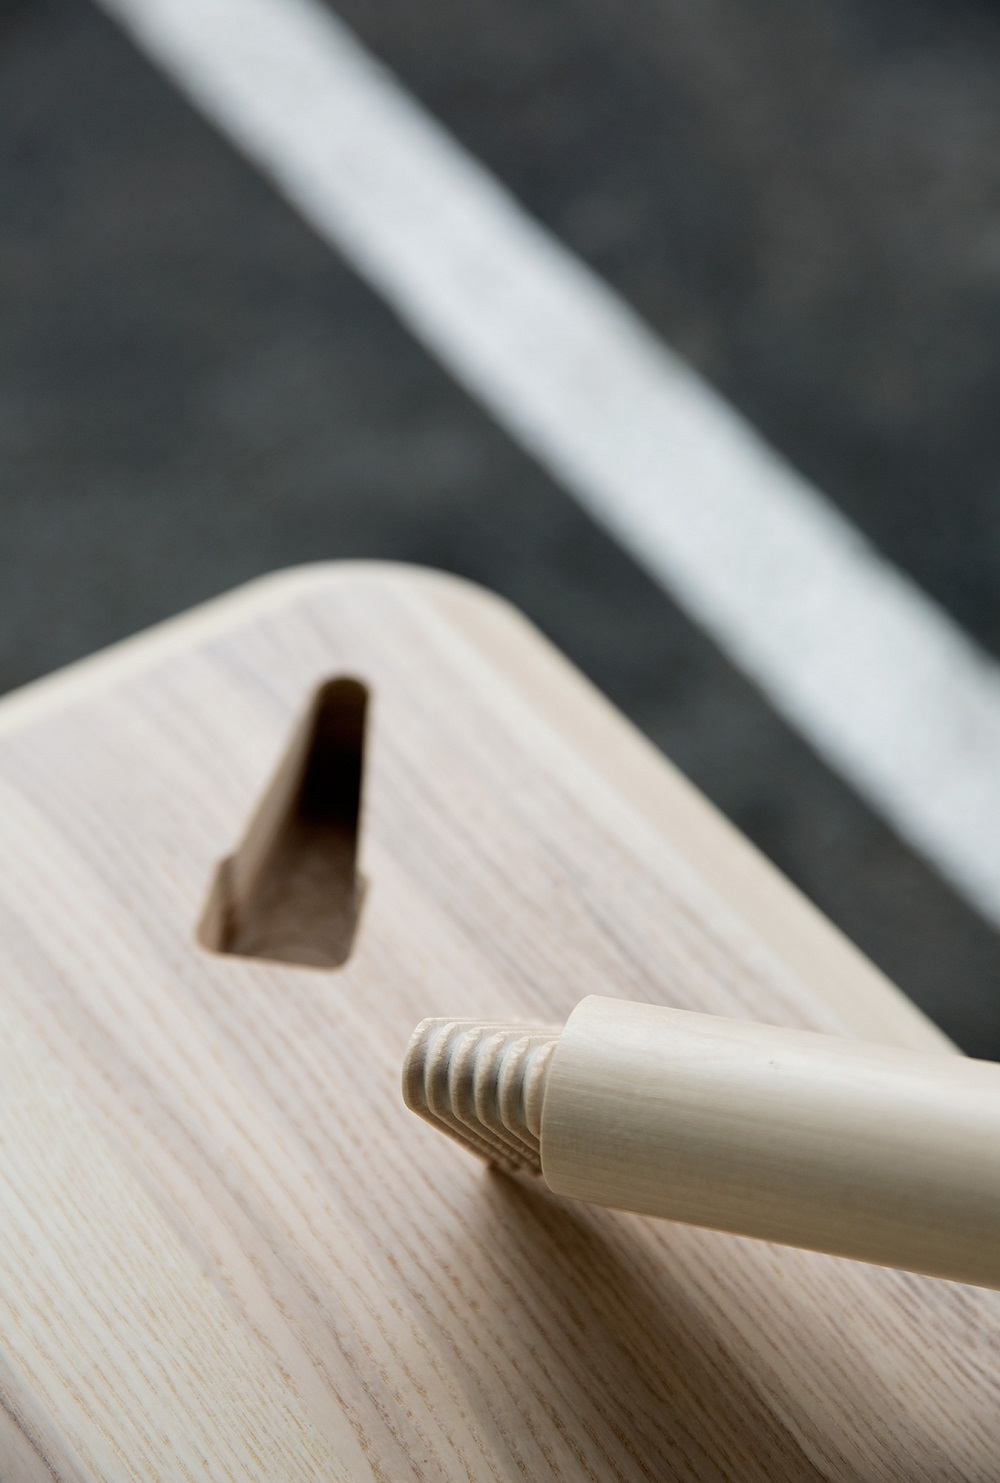 The wedge dowel design was granted a patent in the United States in 2016, allowing Ikea to stay ahead of its competitors by offering customers a one-of-a-kind product. — Picture from Ikea Today website